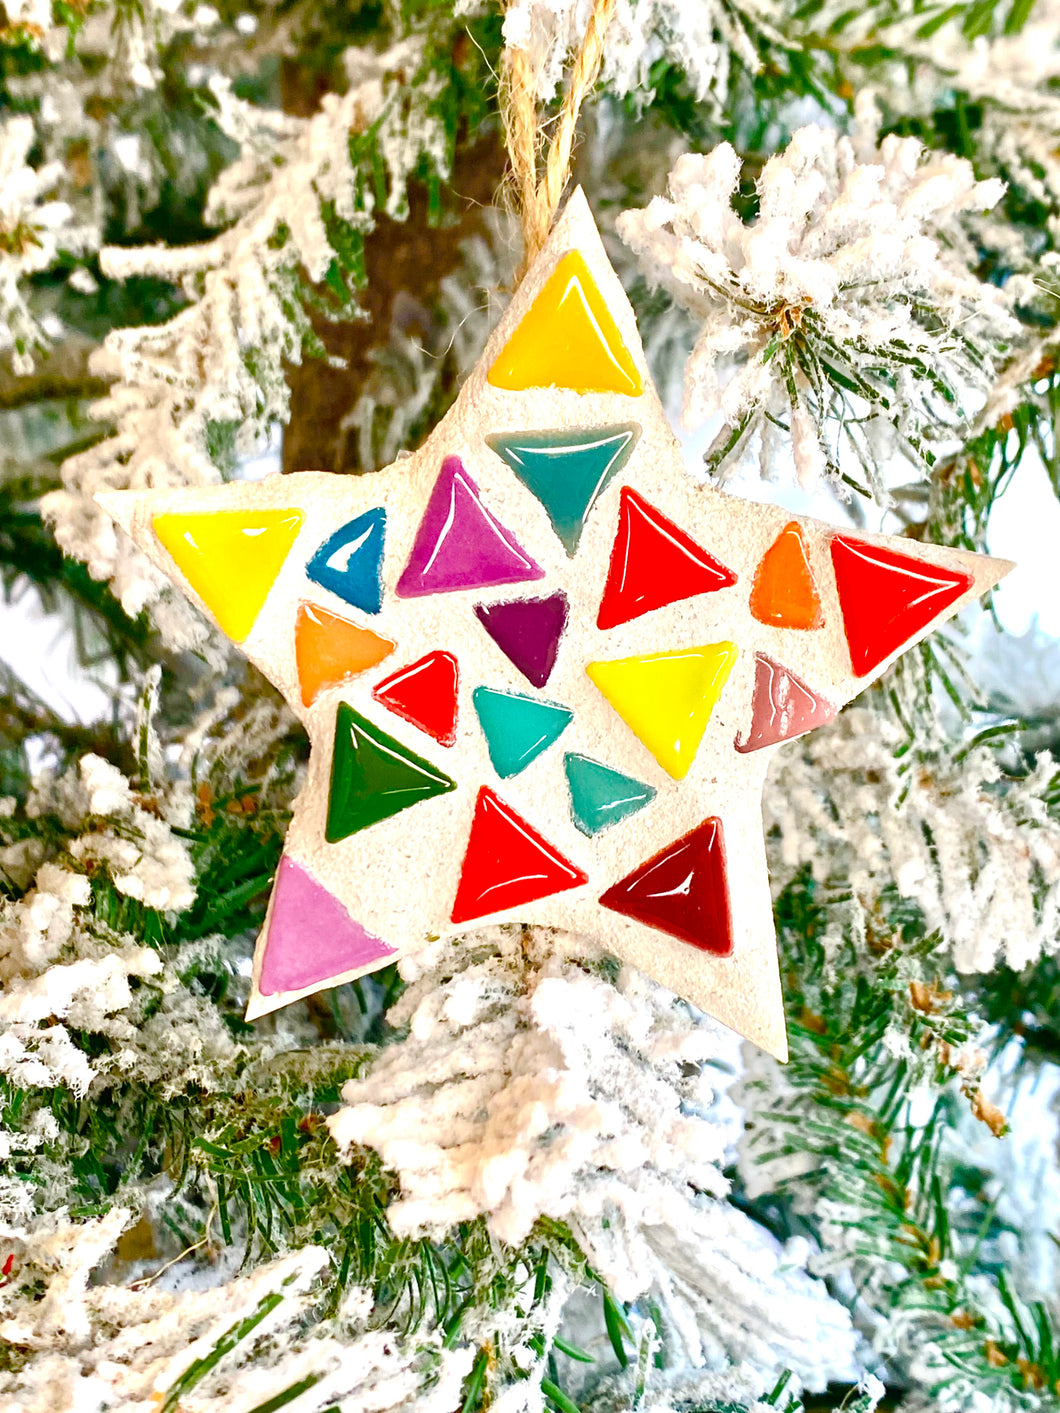 Make-Your-Own Star Ornaments Kit